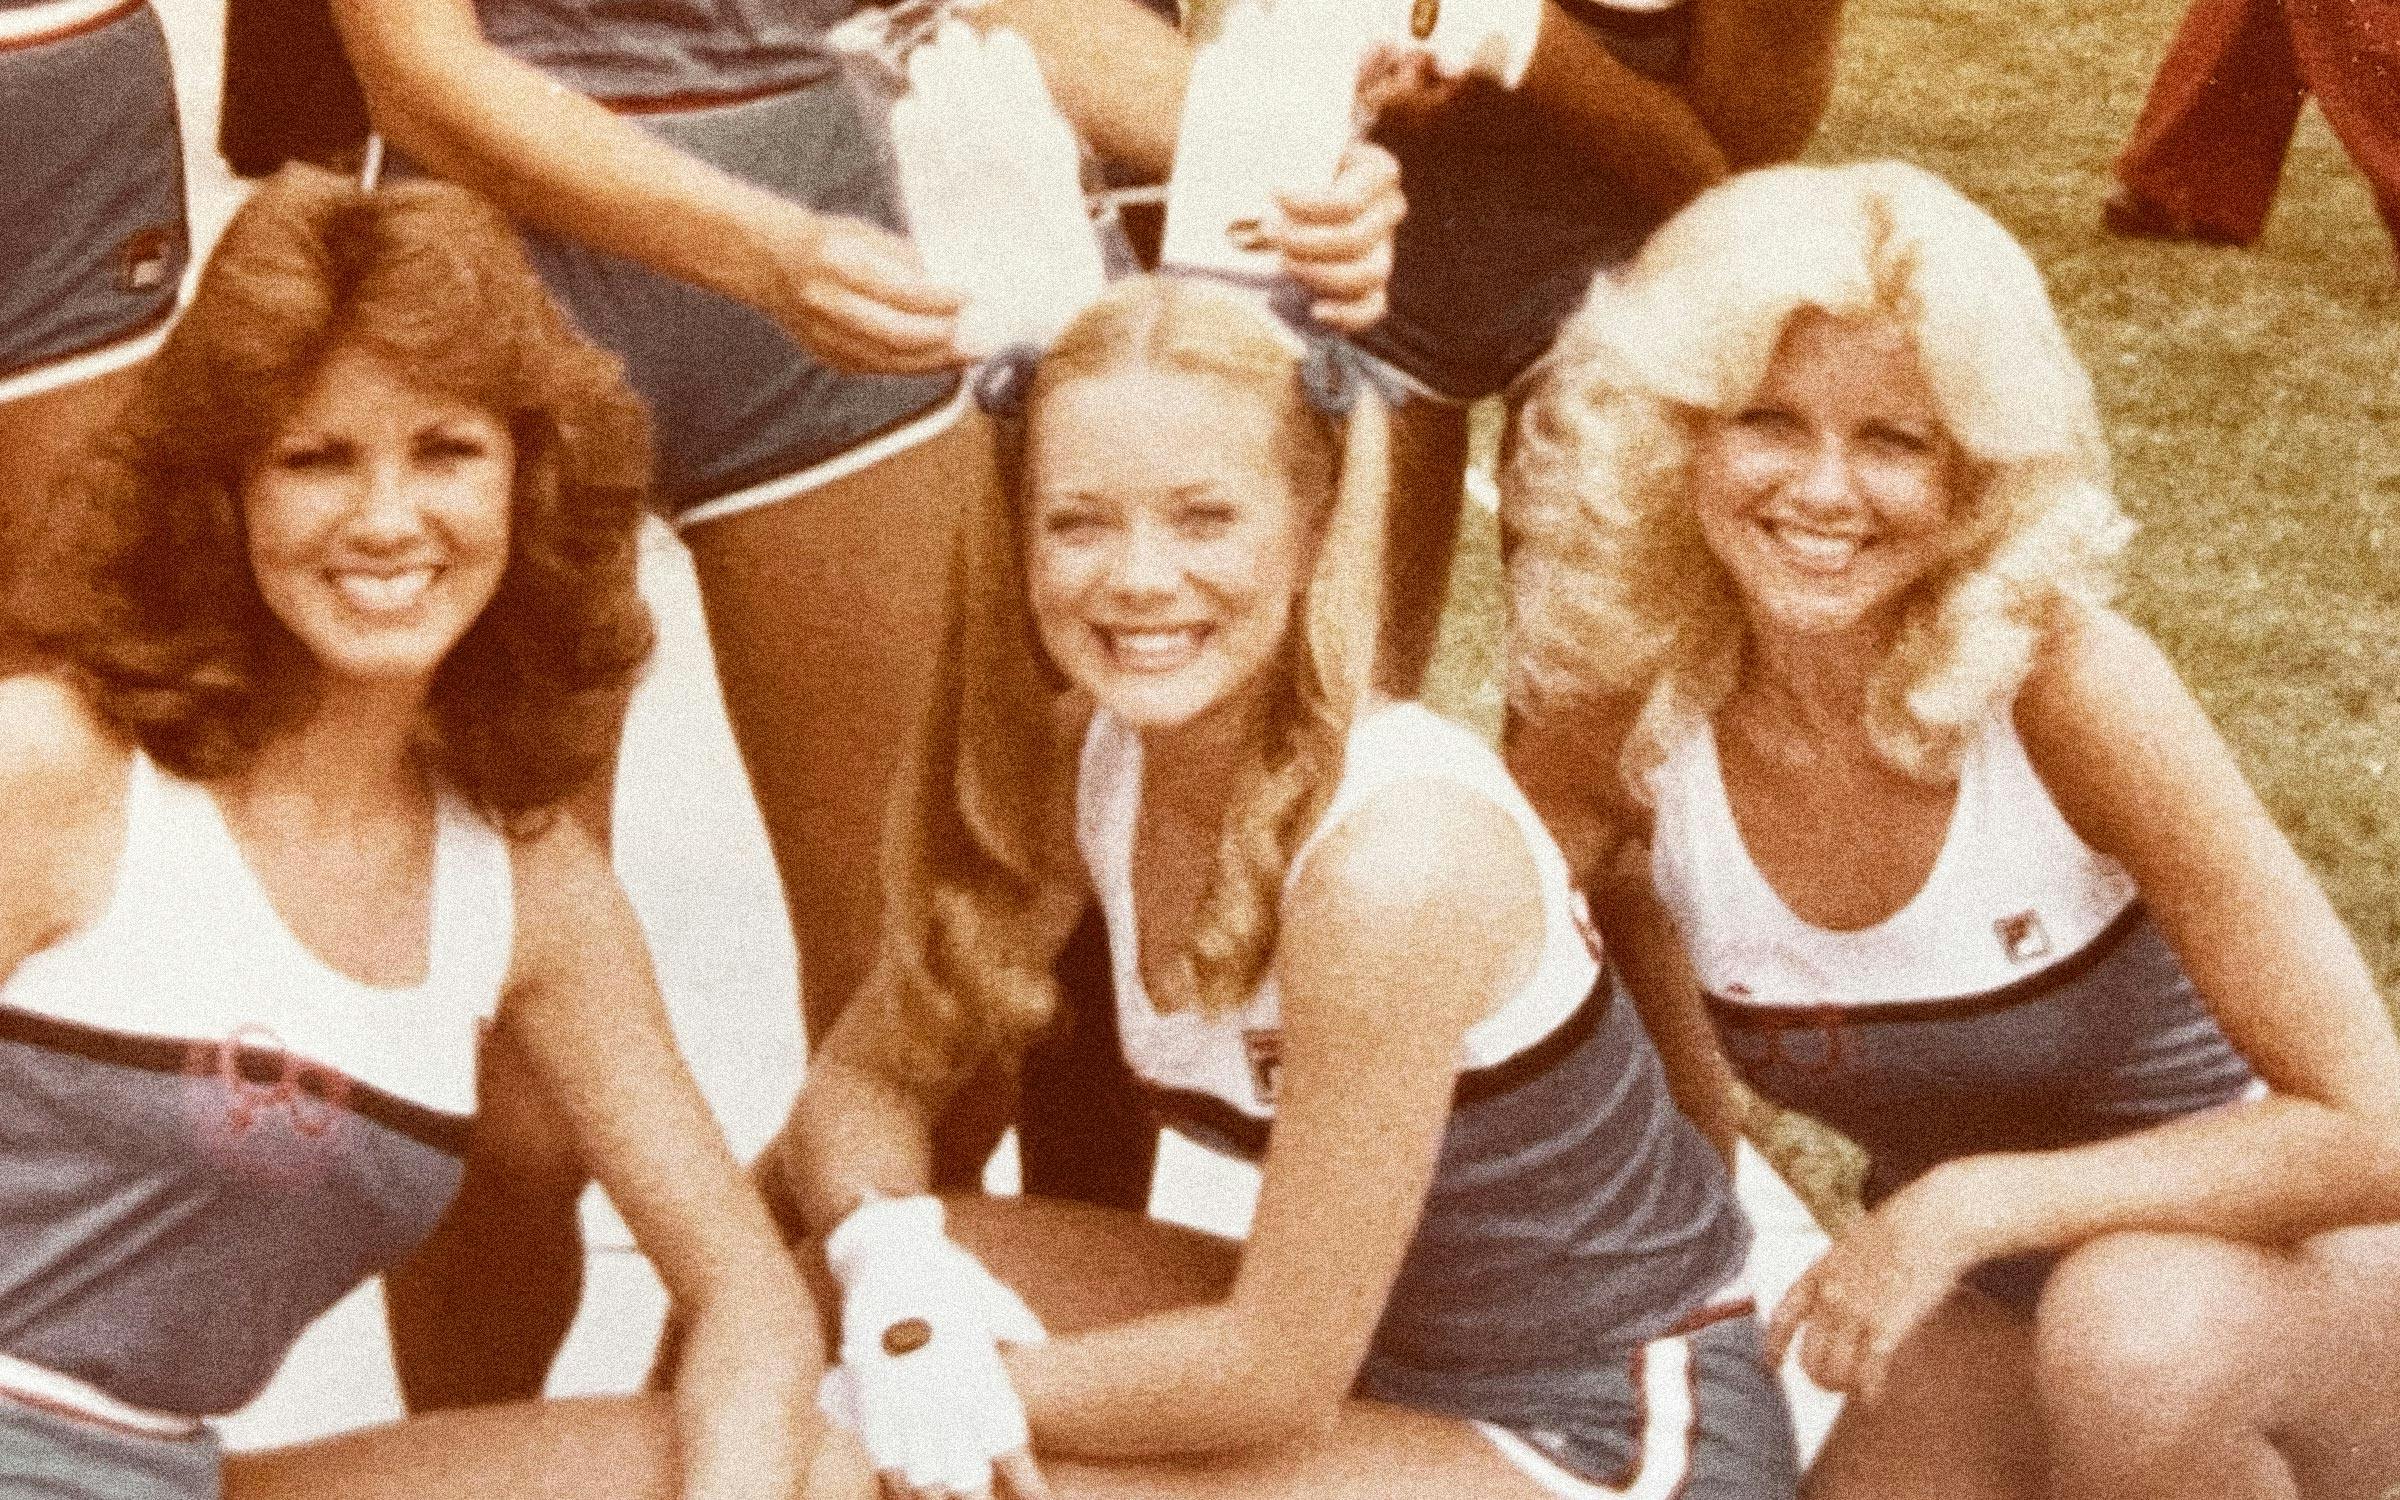 The Cowboys Cheerleader With the Pigtails Shaves Her Head – Texas Monthly